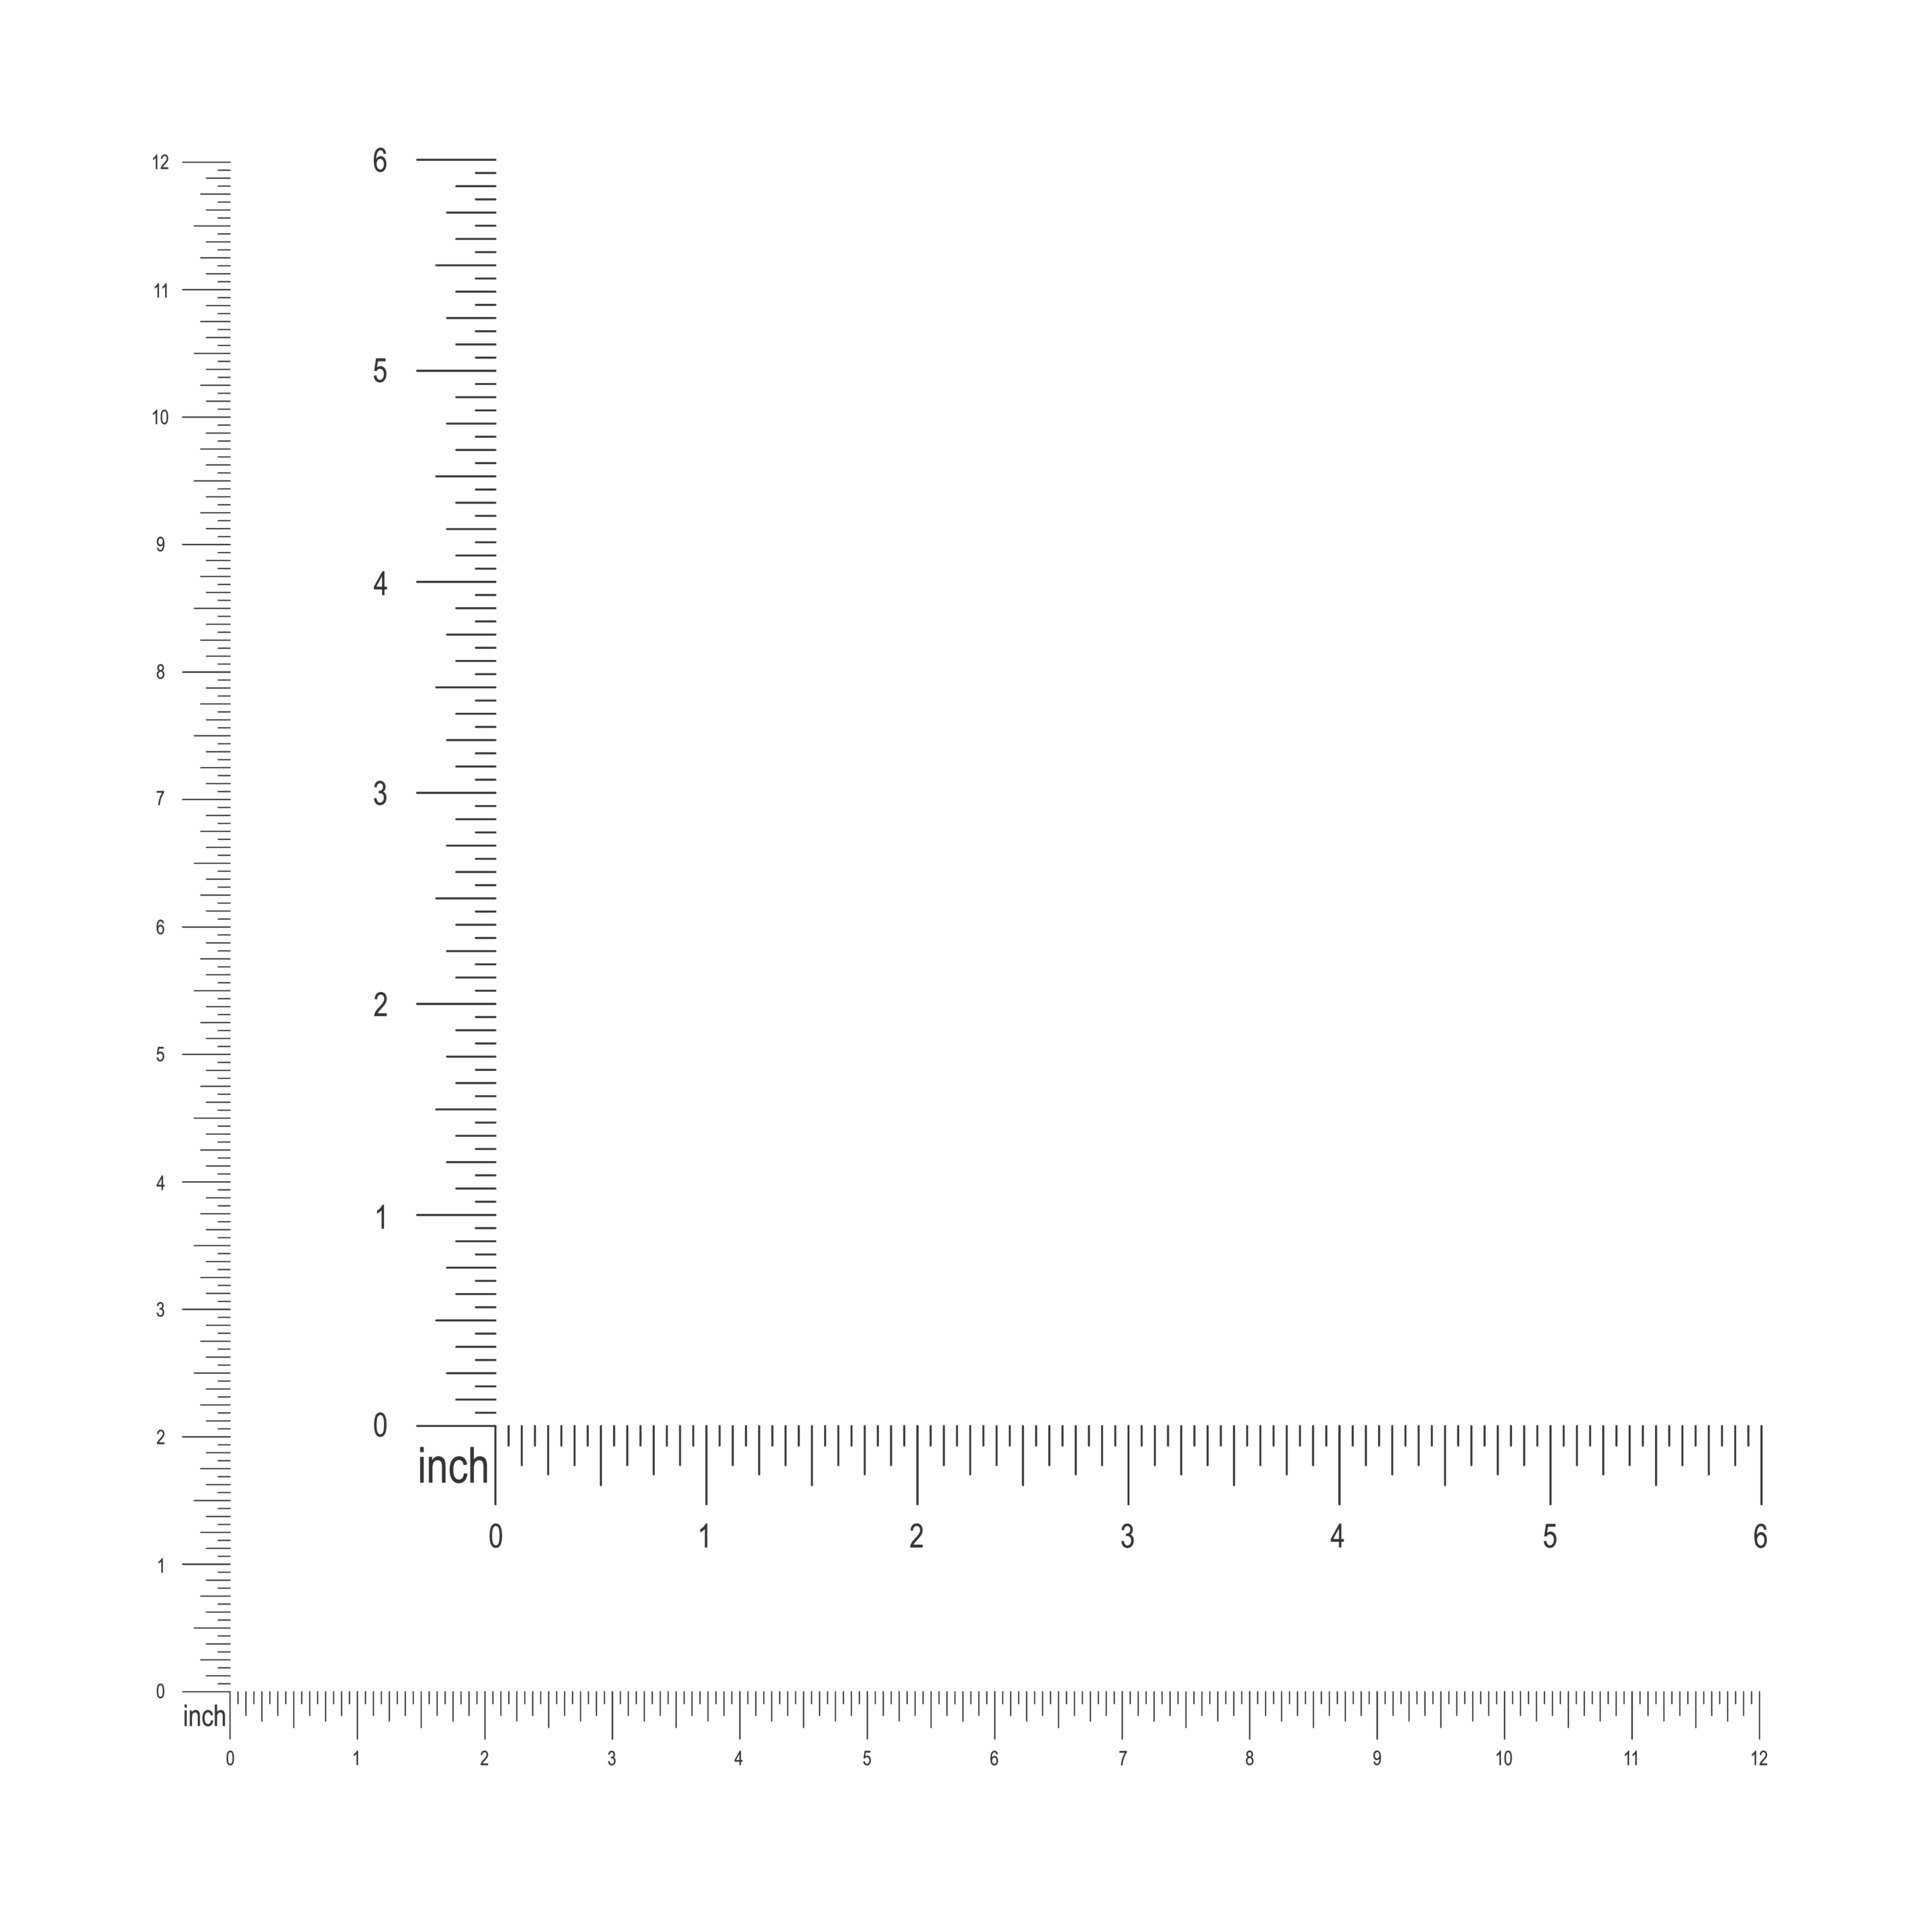 https://static.vecteezy.com/system/resources/previews/020/986/584/original/6-and-12-inches-or-1-foot-corner-ruler-template-measuring-tool-with-imperial-units-vertical-and-horizontal-markup-and-numbers-vector.jpg